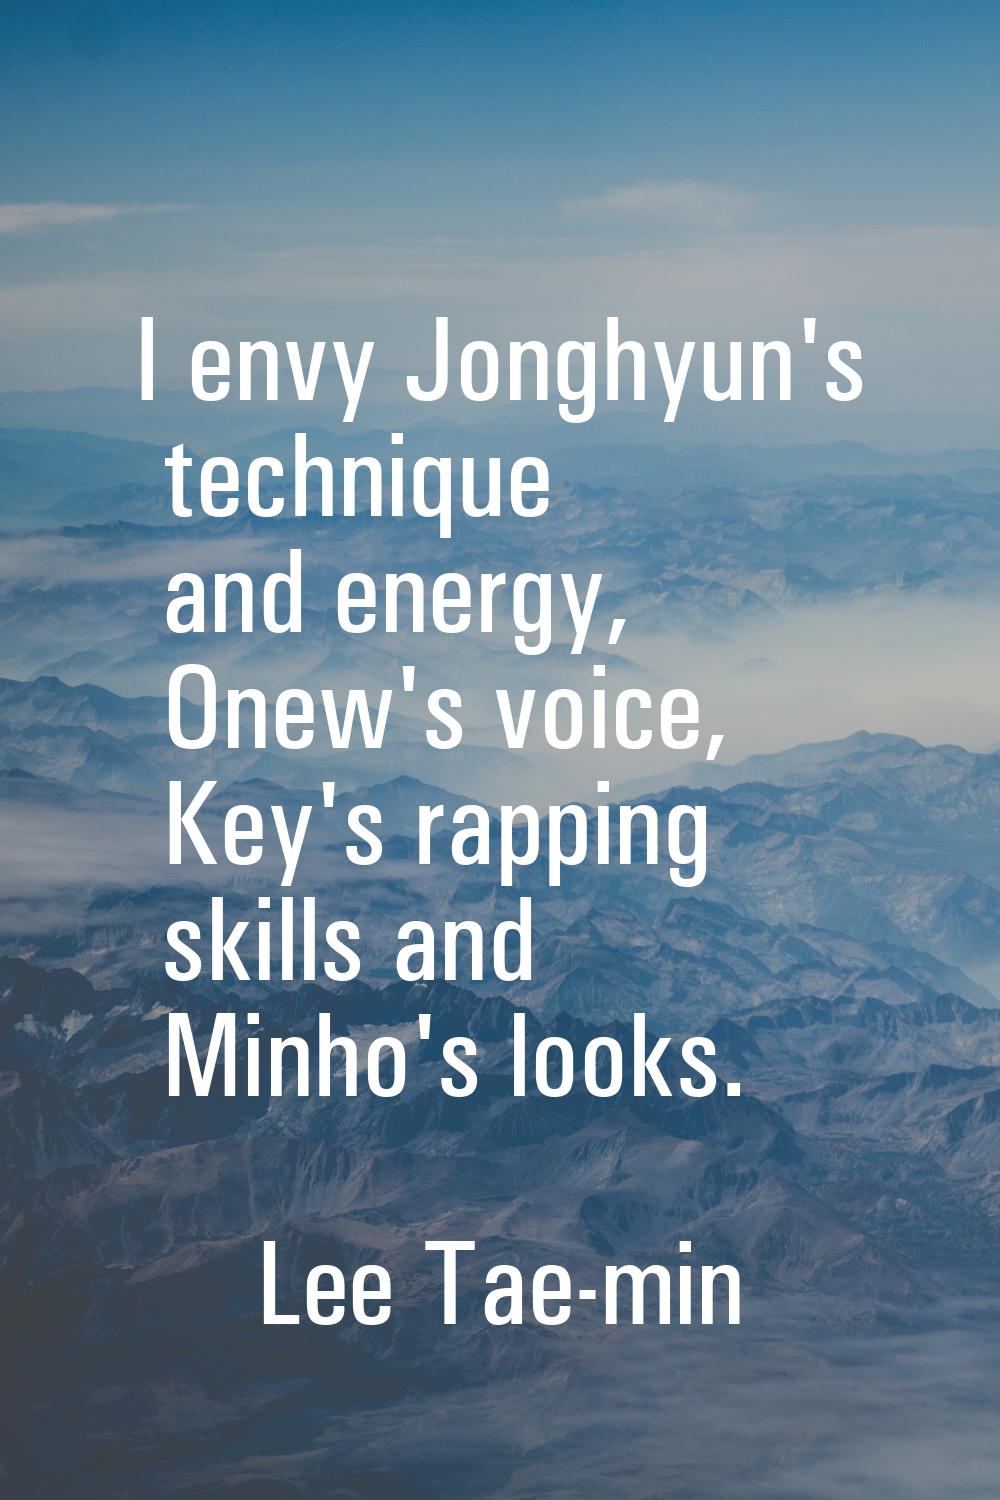 I envy Jonghyun's technique and energy, Onew's voice, Key's rapping skills and Minho's looks.